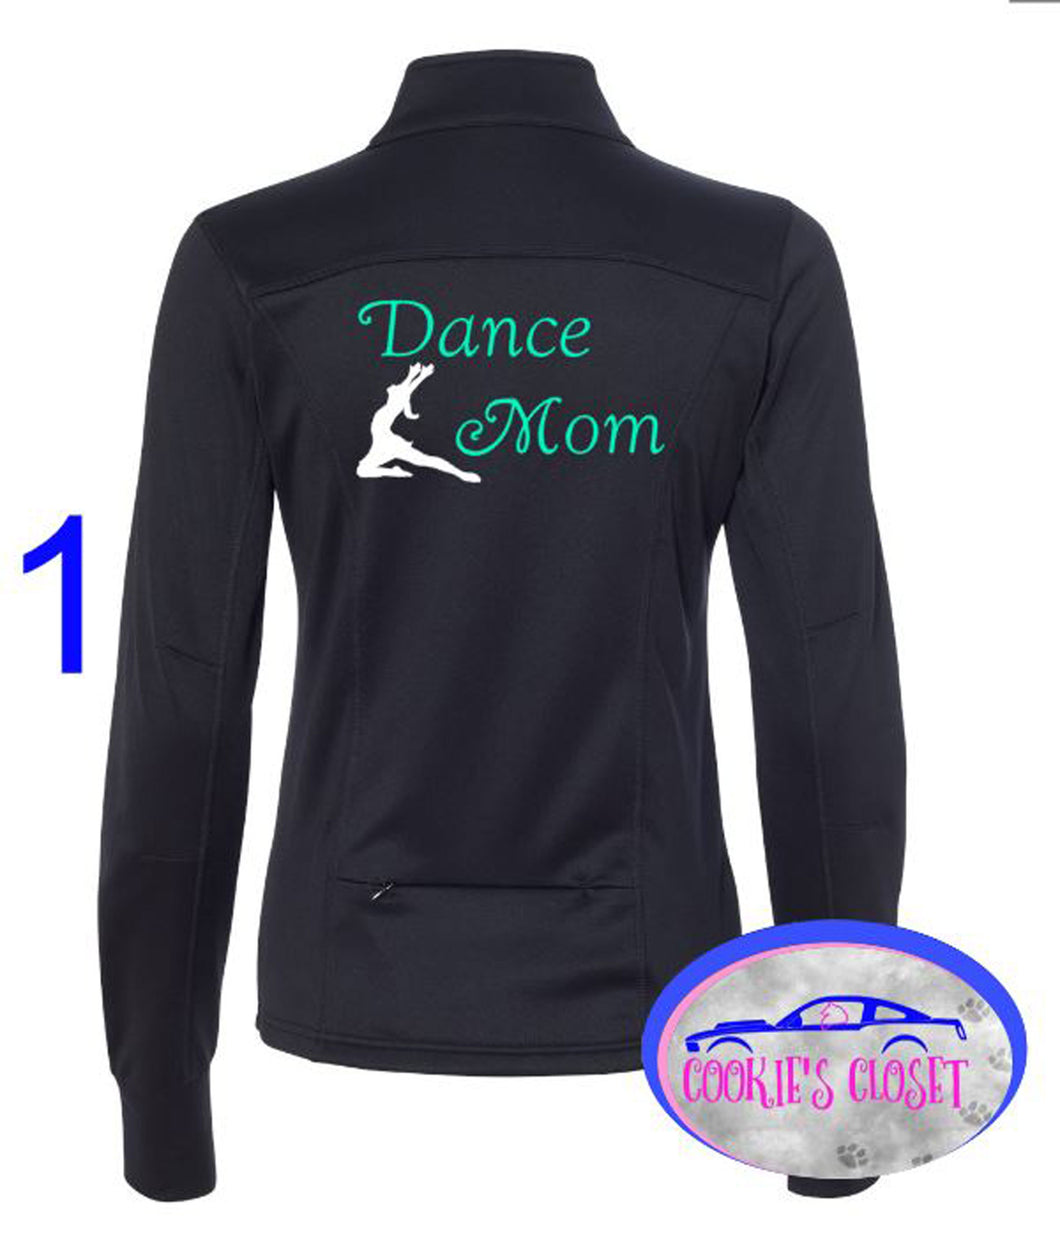 ***CLEARANCE*** Ladies Fitted Dance Mom Jackets Black Large